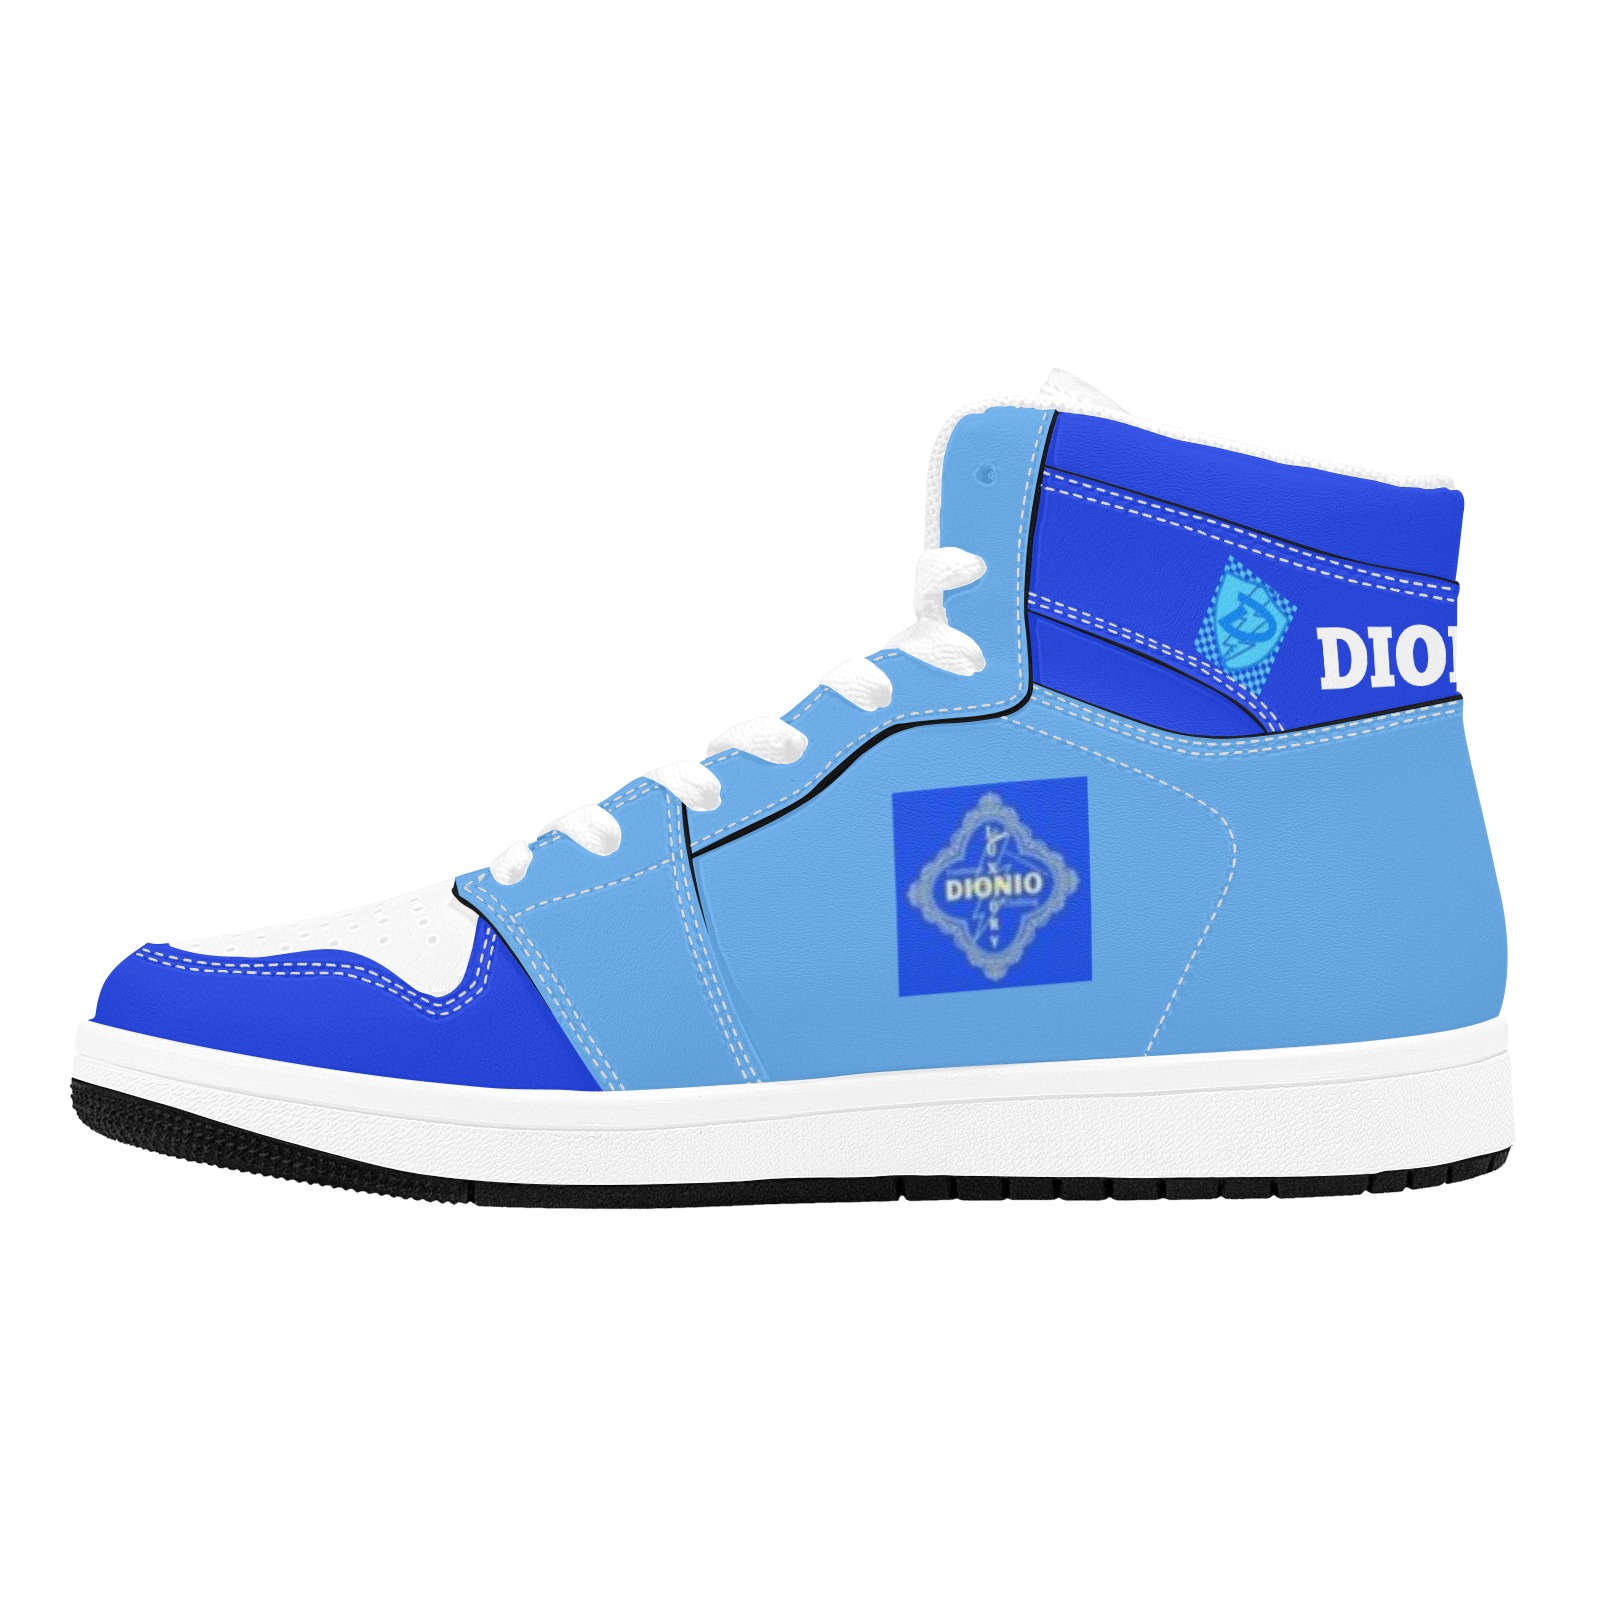 DIONIO - Carolina Bluez Basketball Sneakers Unisex High Top Sneakers (Model 20042)